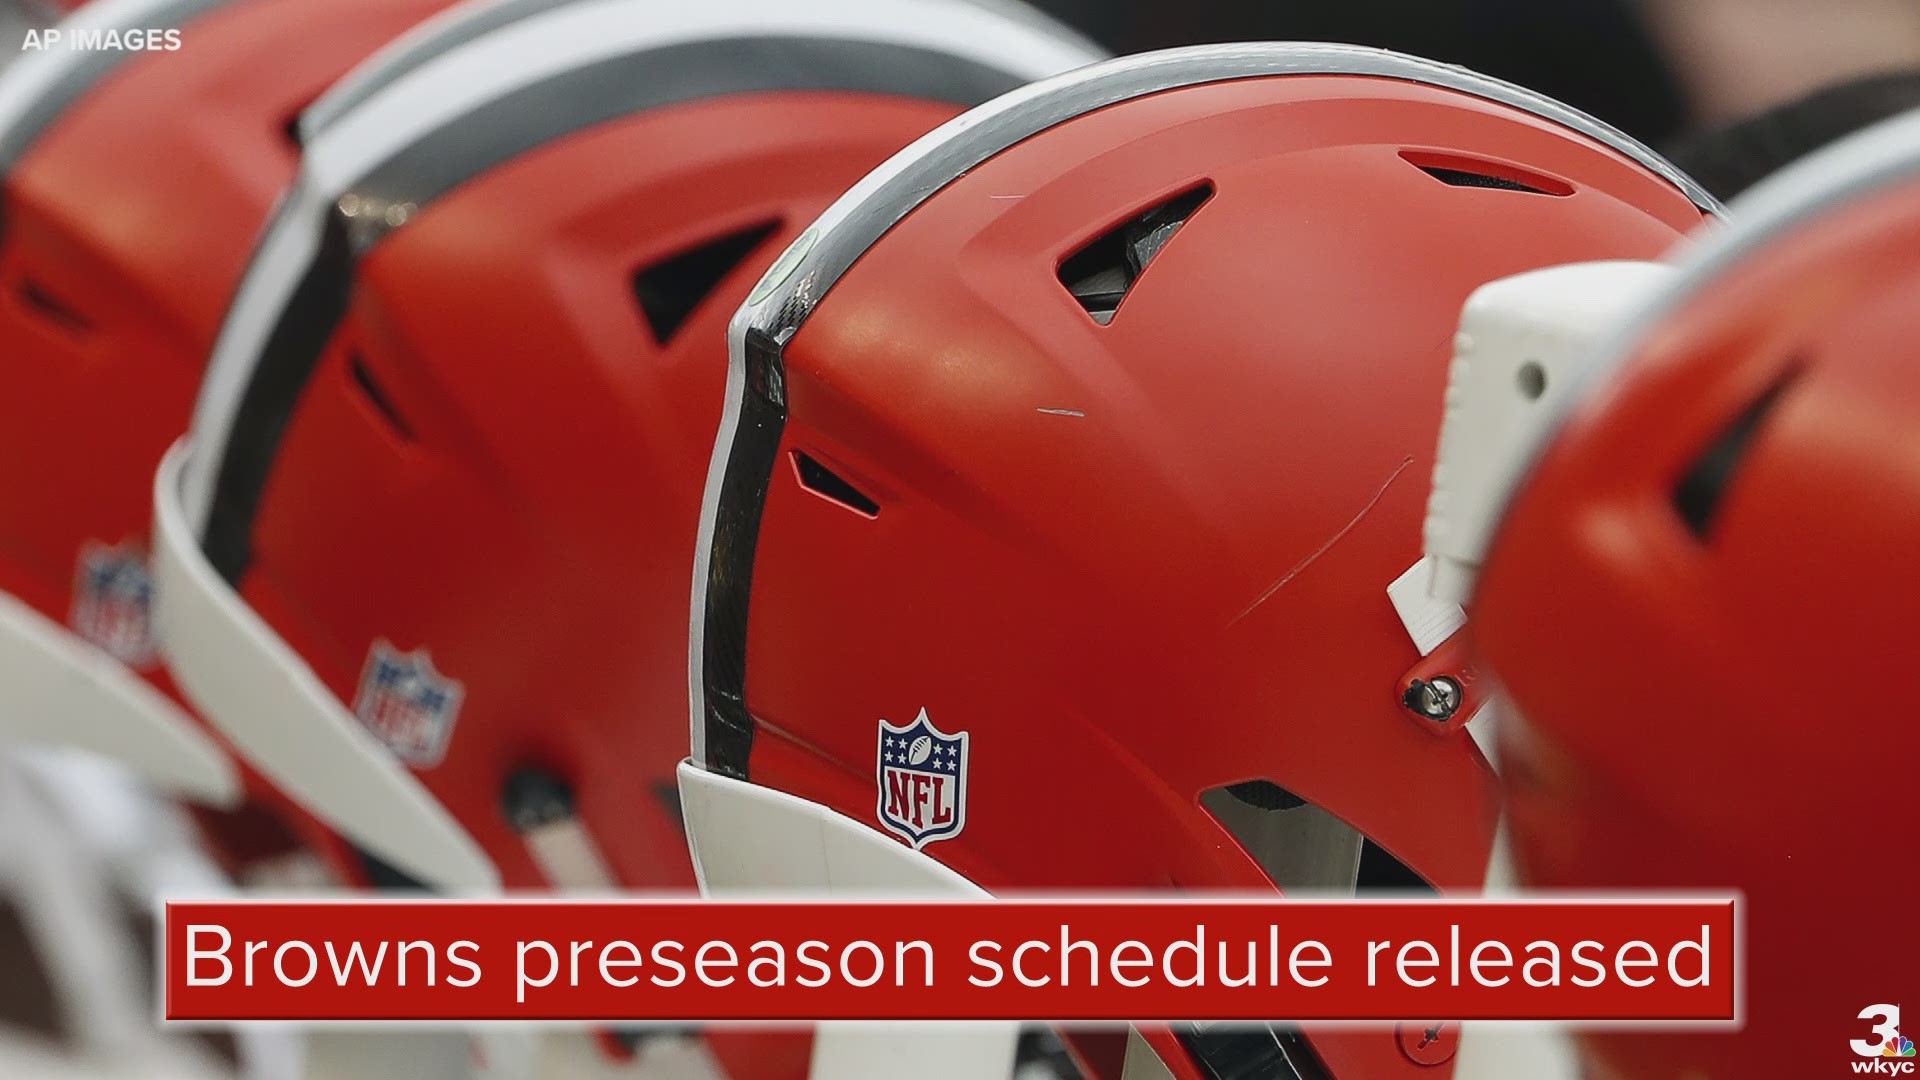 On Tuesday, the Cleveland Browns announced their opponents for the 2019 preseason.